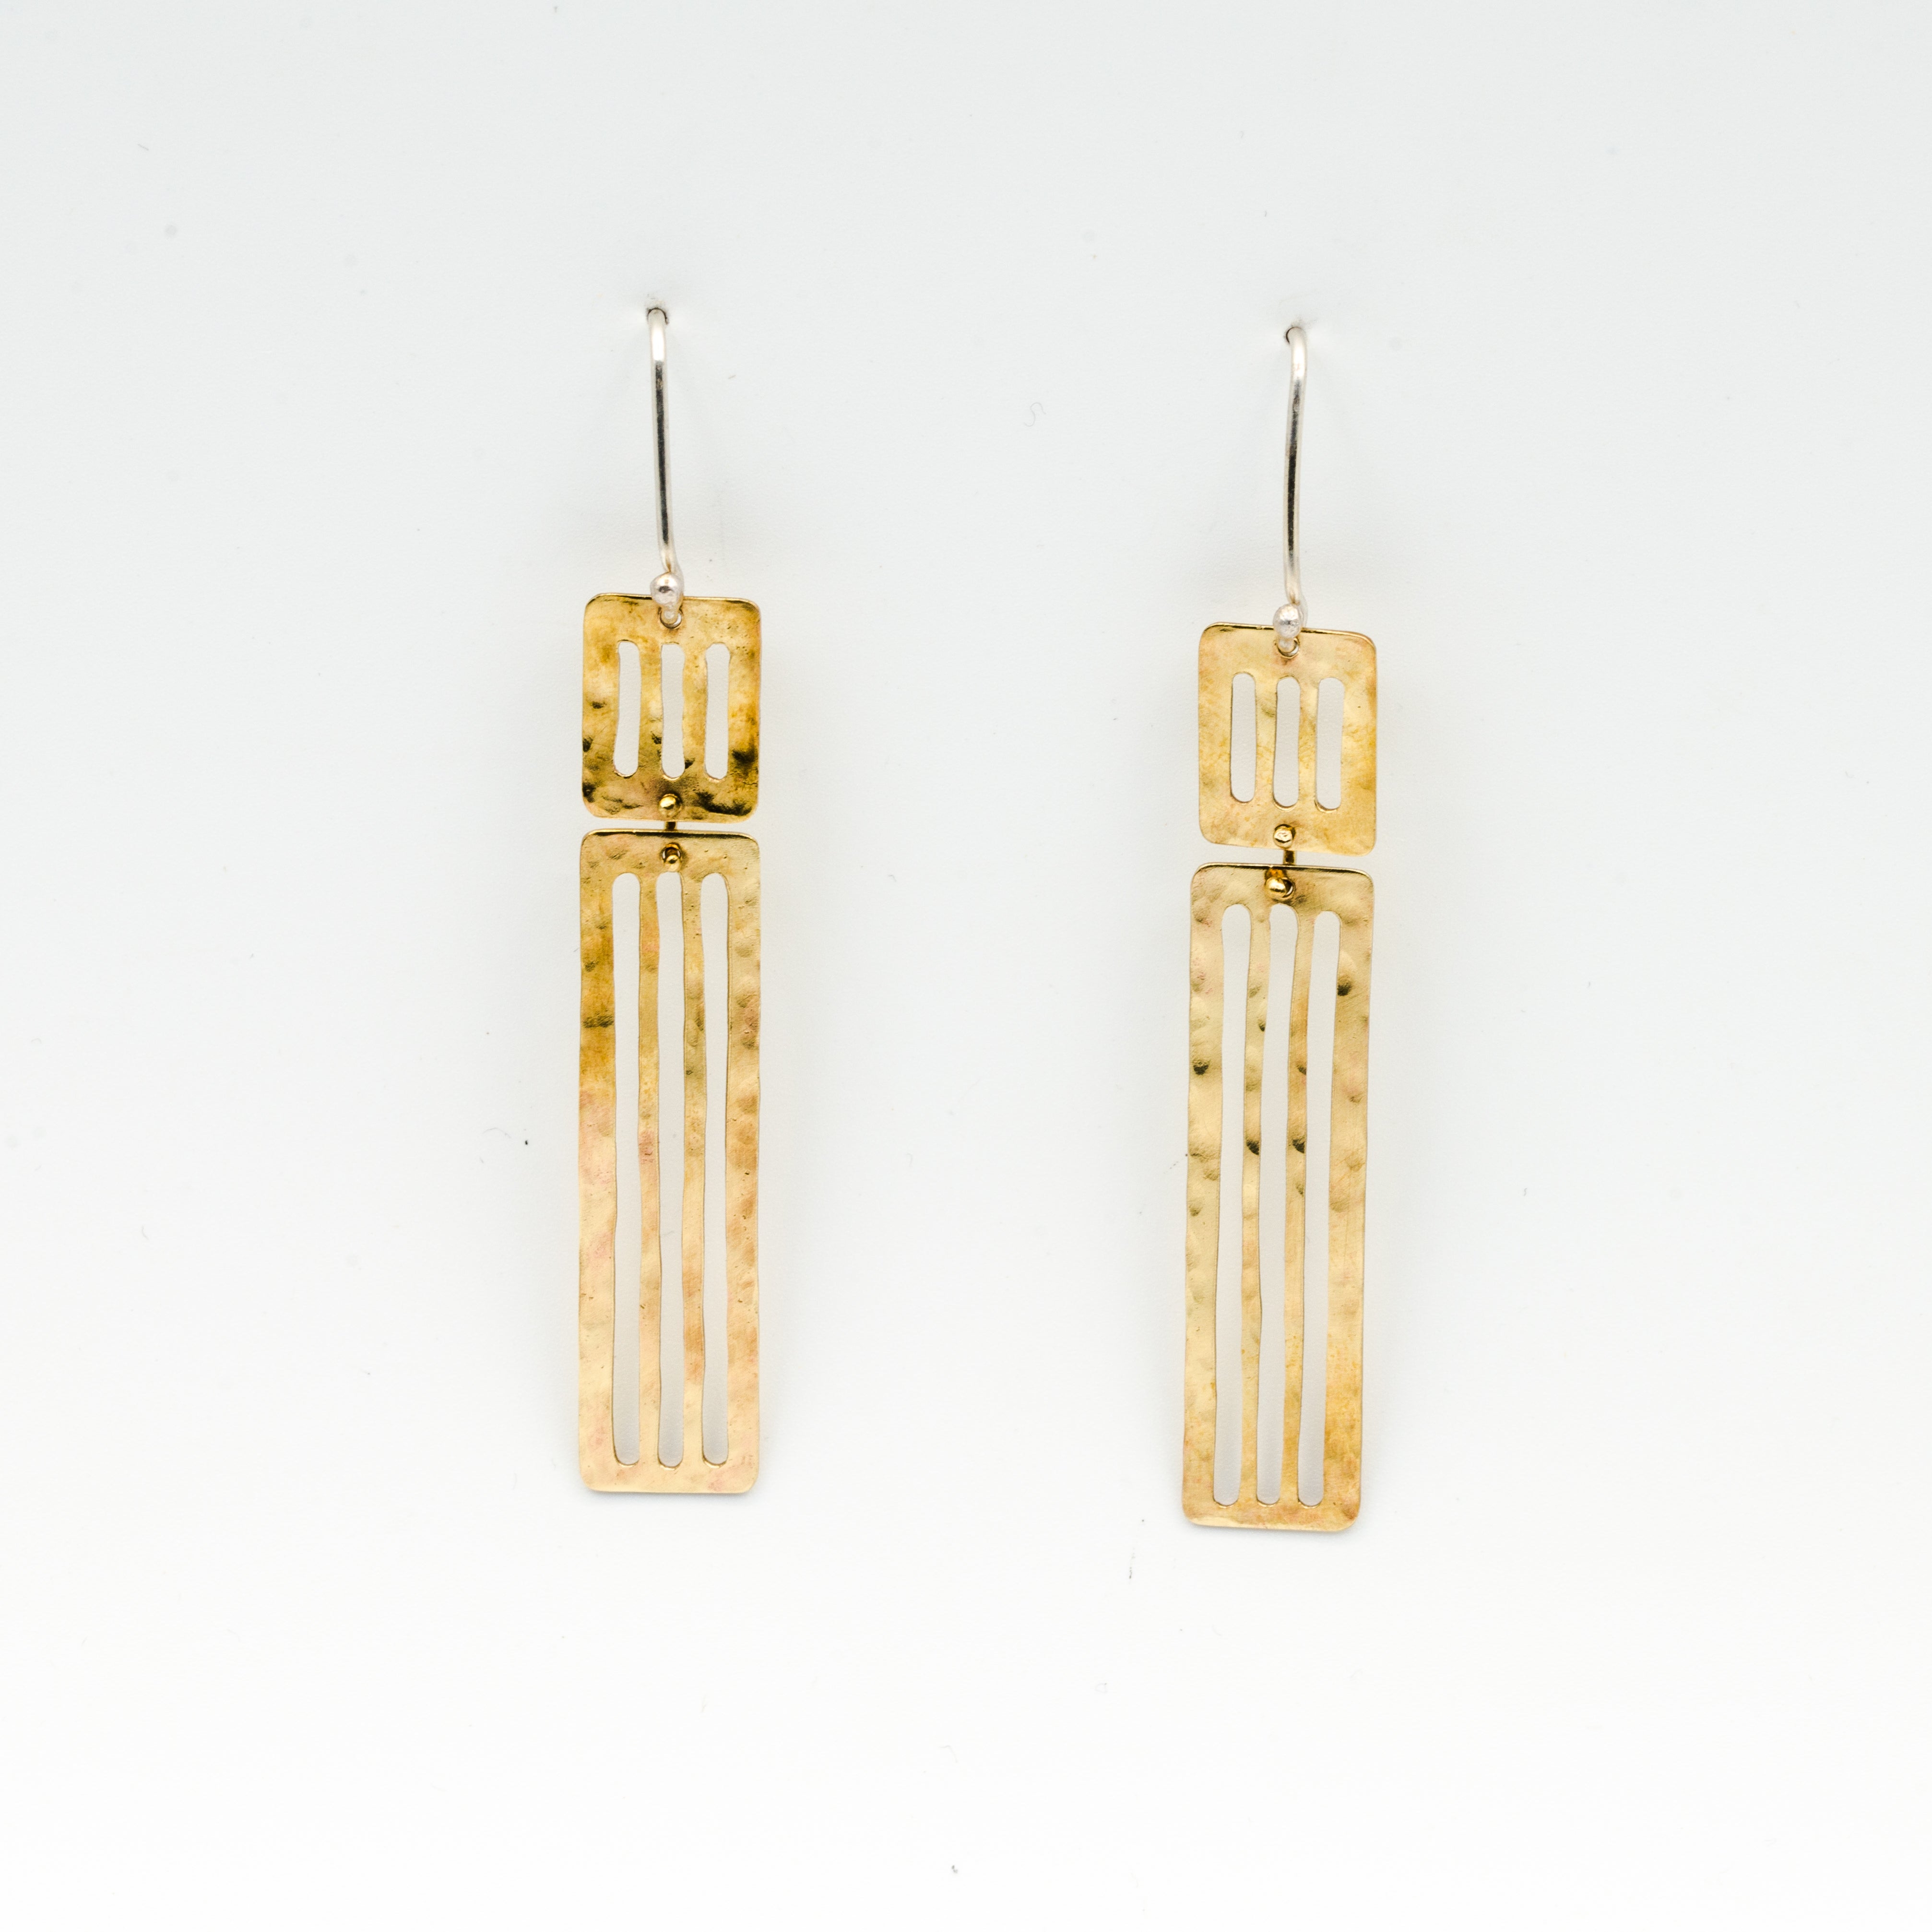 long dangly earrings hanging on white background